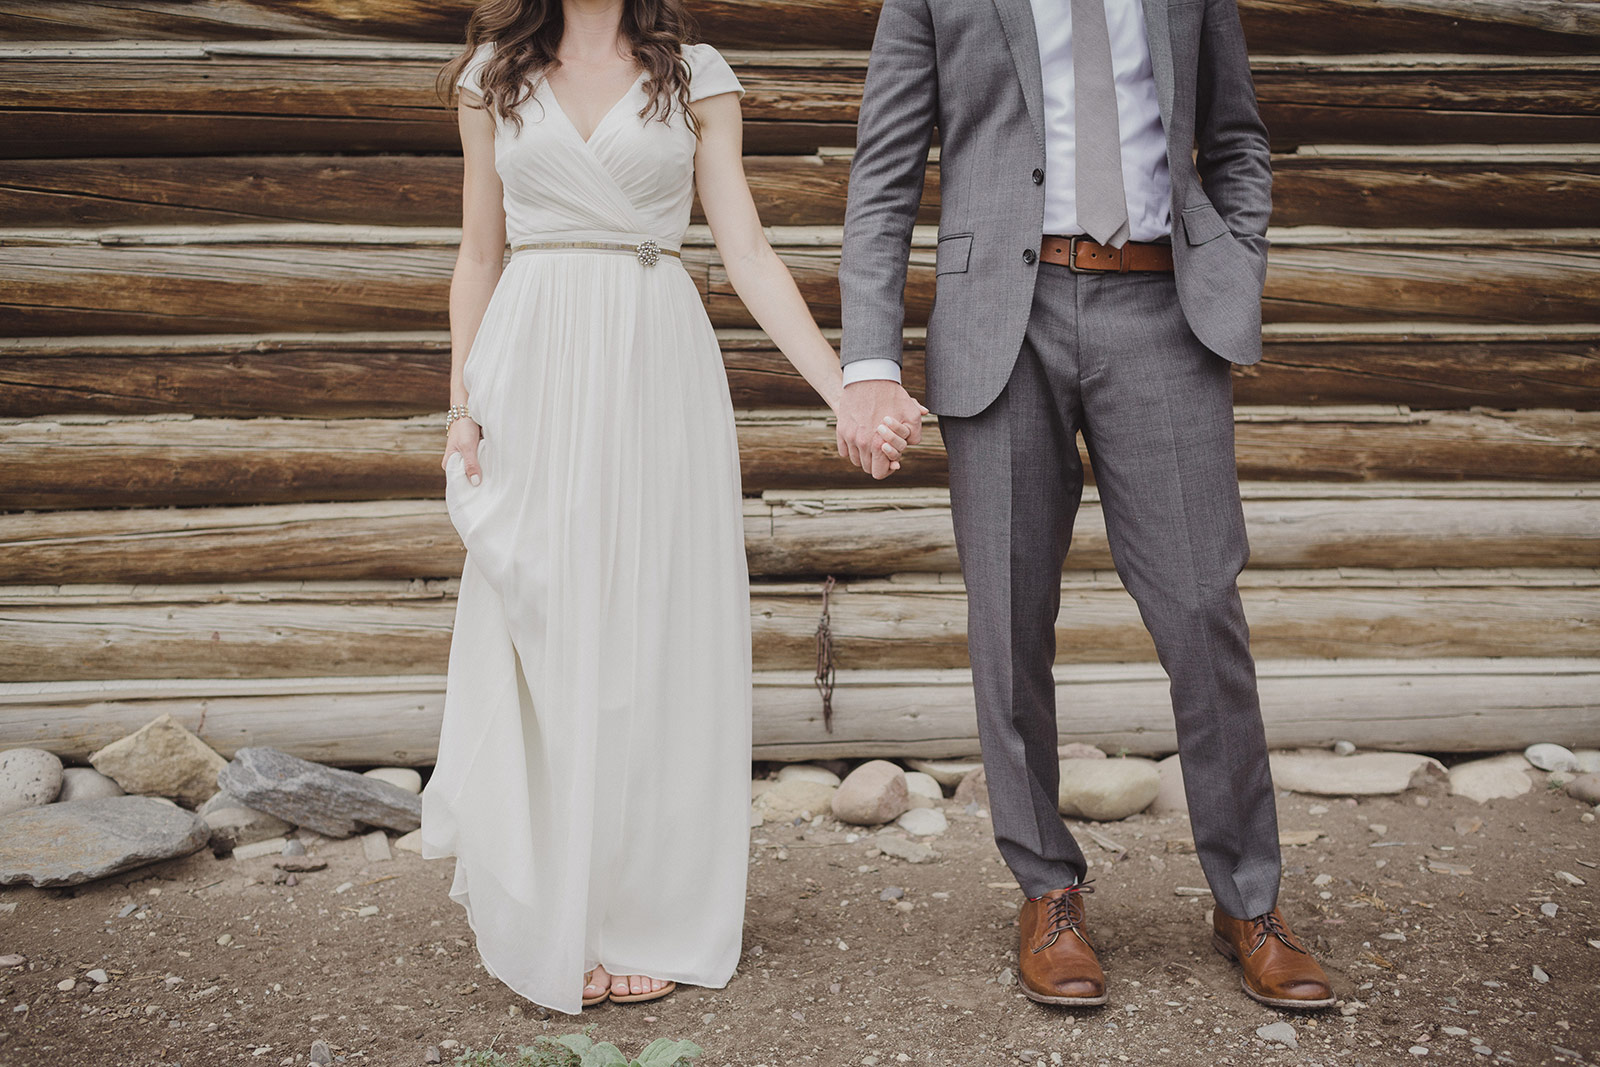 A man and woman holding hands in front of a log wall.